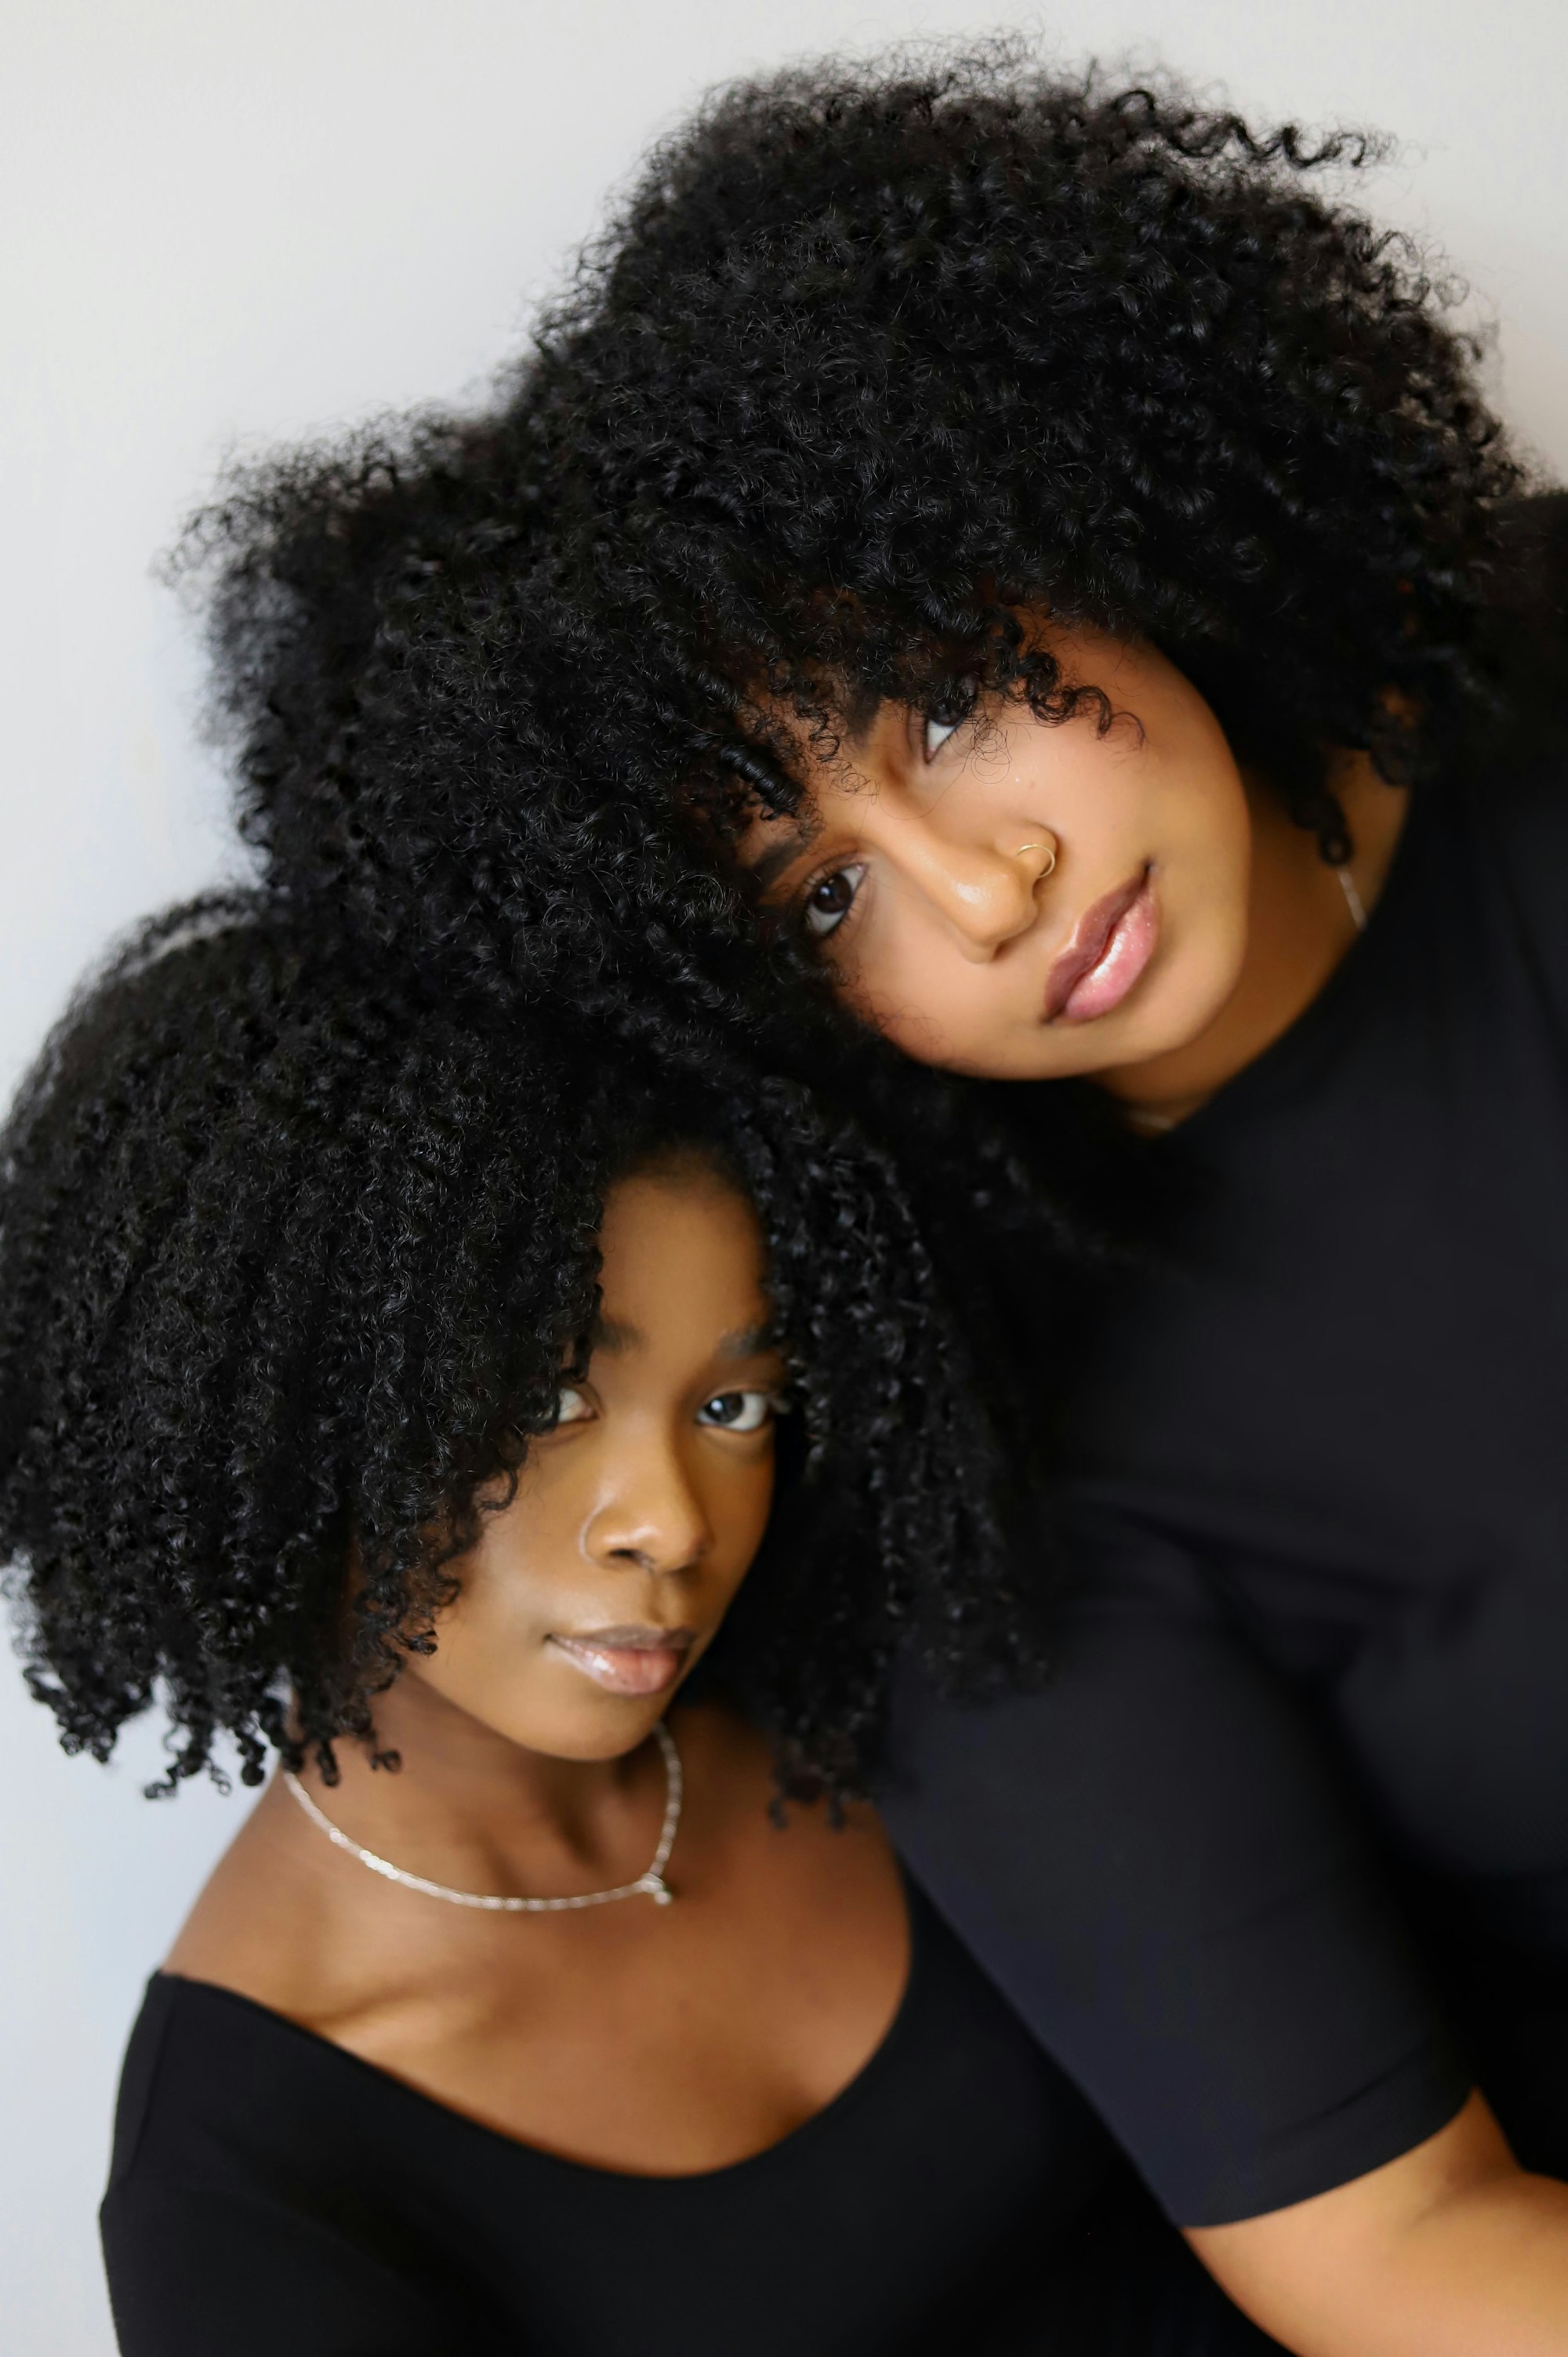 Fifteen Percent Pledge and Sephora unveil $100K grant empowering Black-owned beauty brands